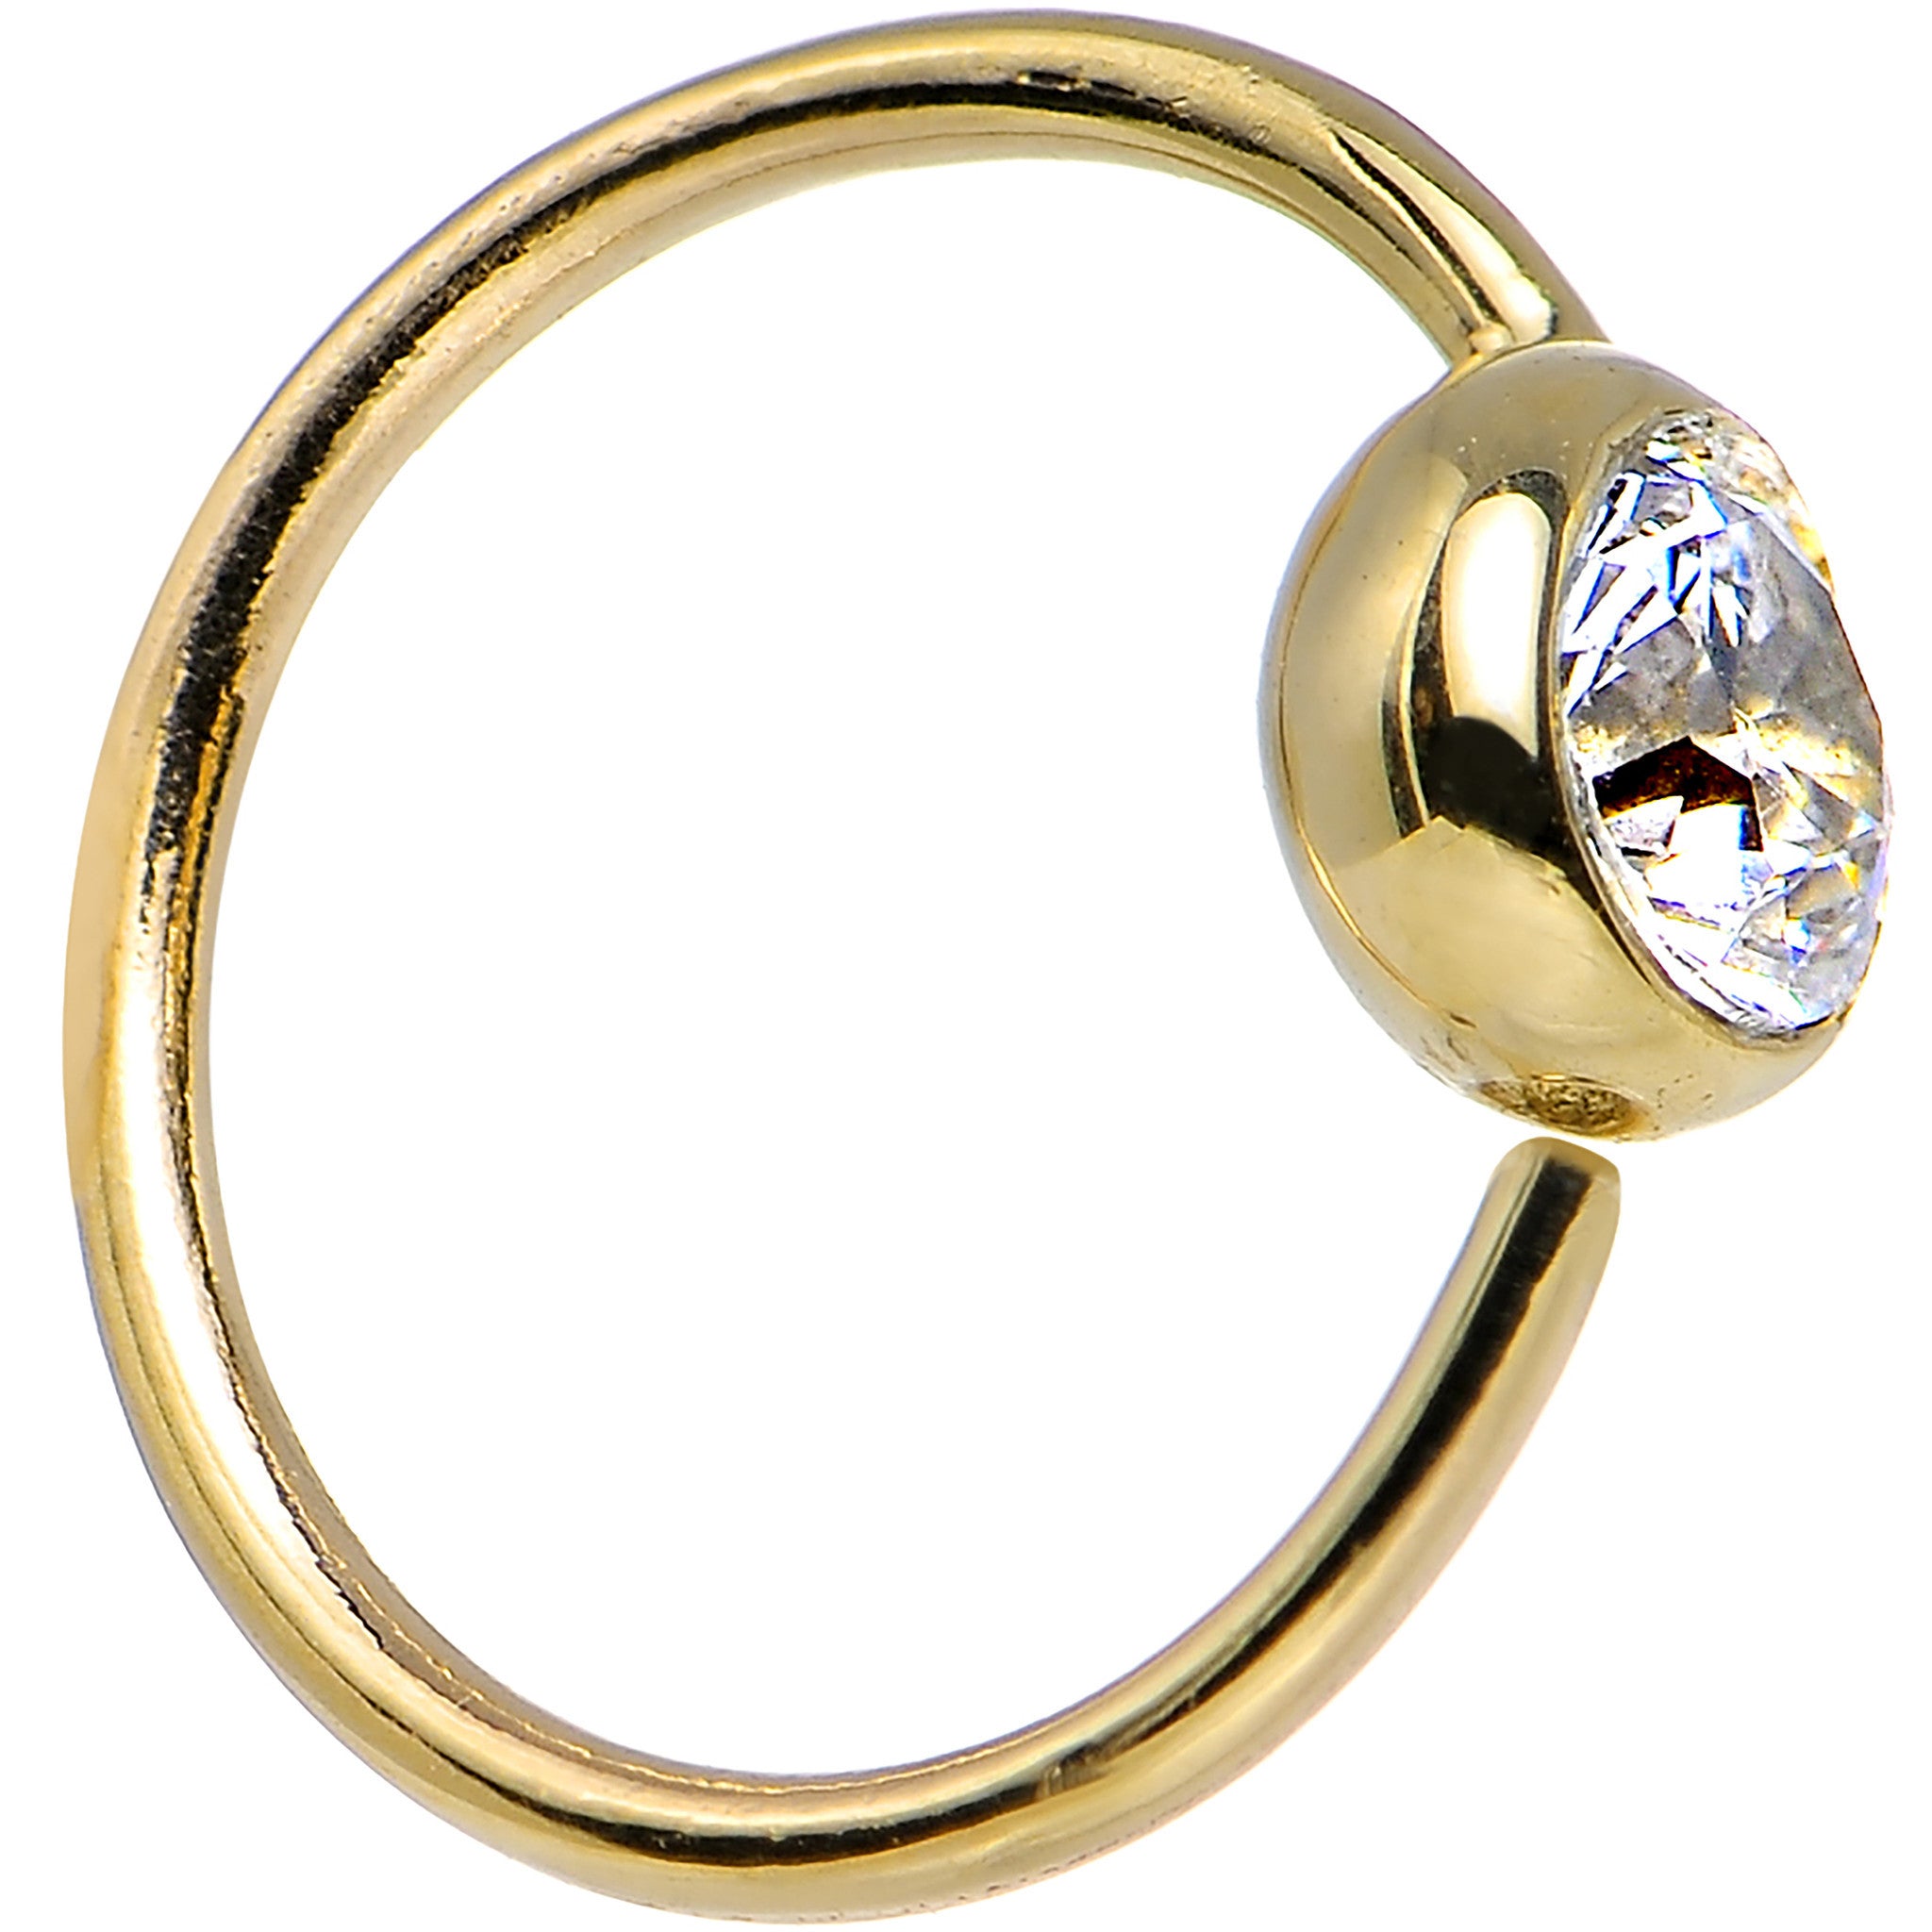 20 Gauge 5/16 Clear CZ Solid 14KT Yellow Gold Hoop Ring